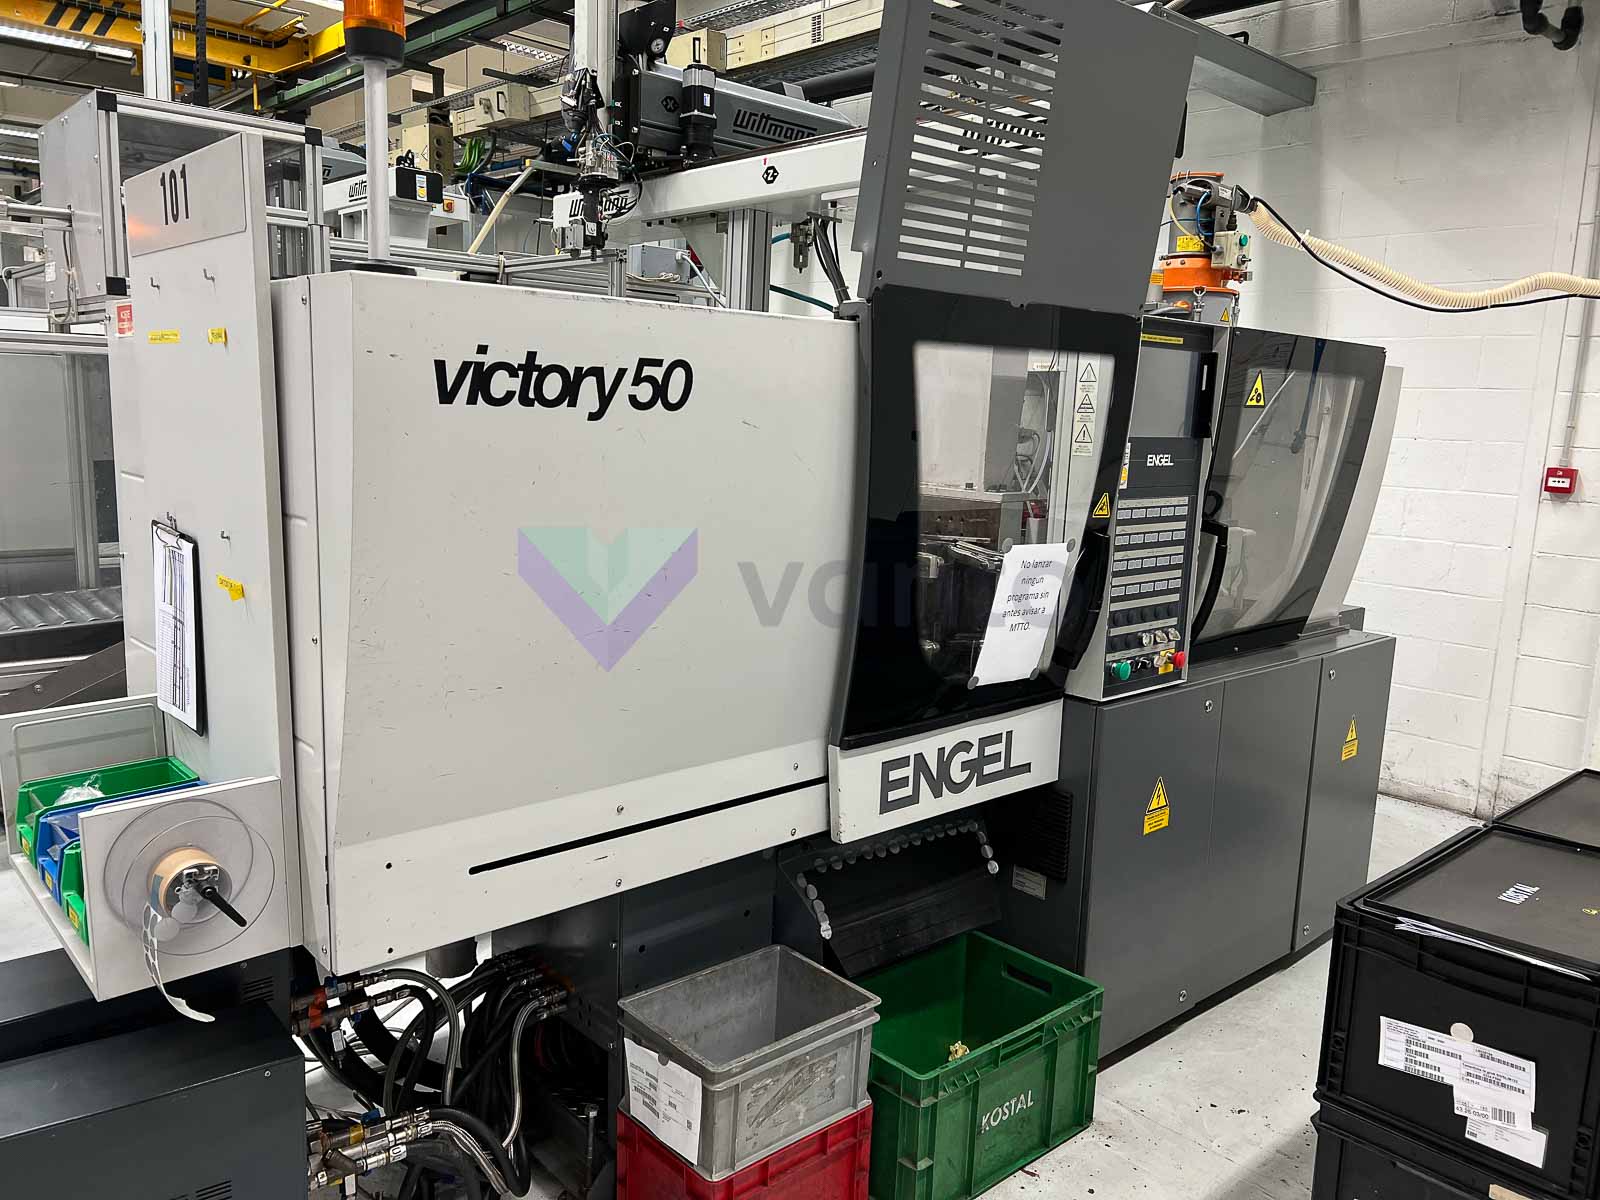 ENGEL VICTORY VC 200 / 50 POWER 50t injection molding machine (2006) id10766